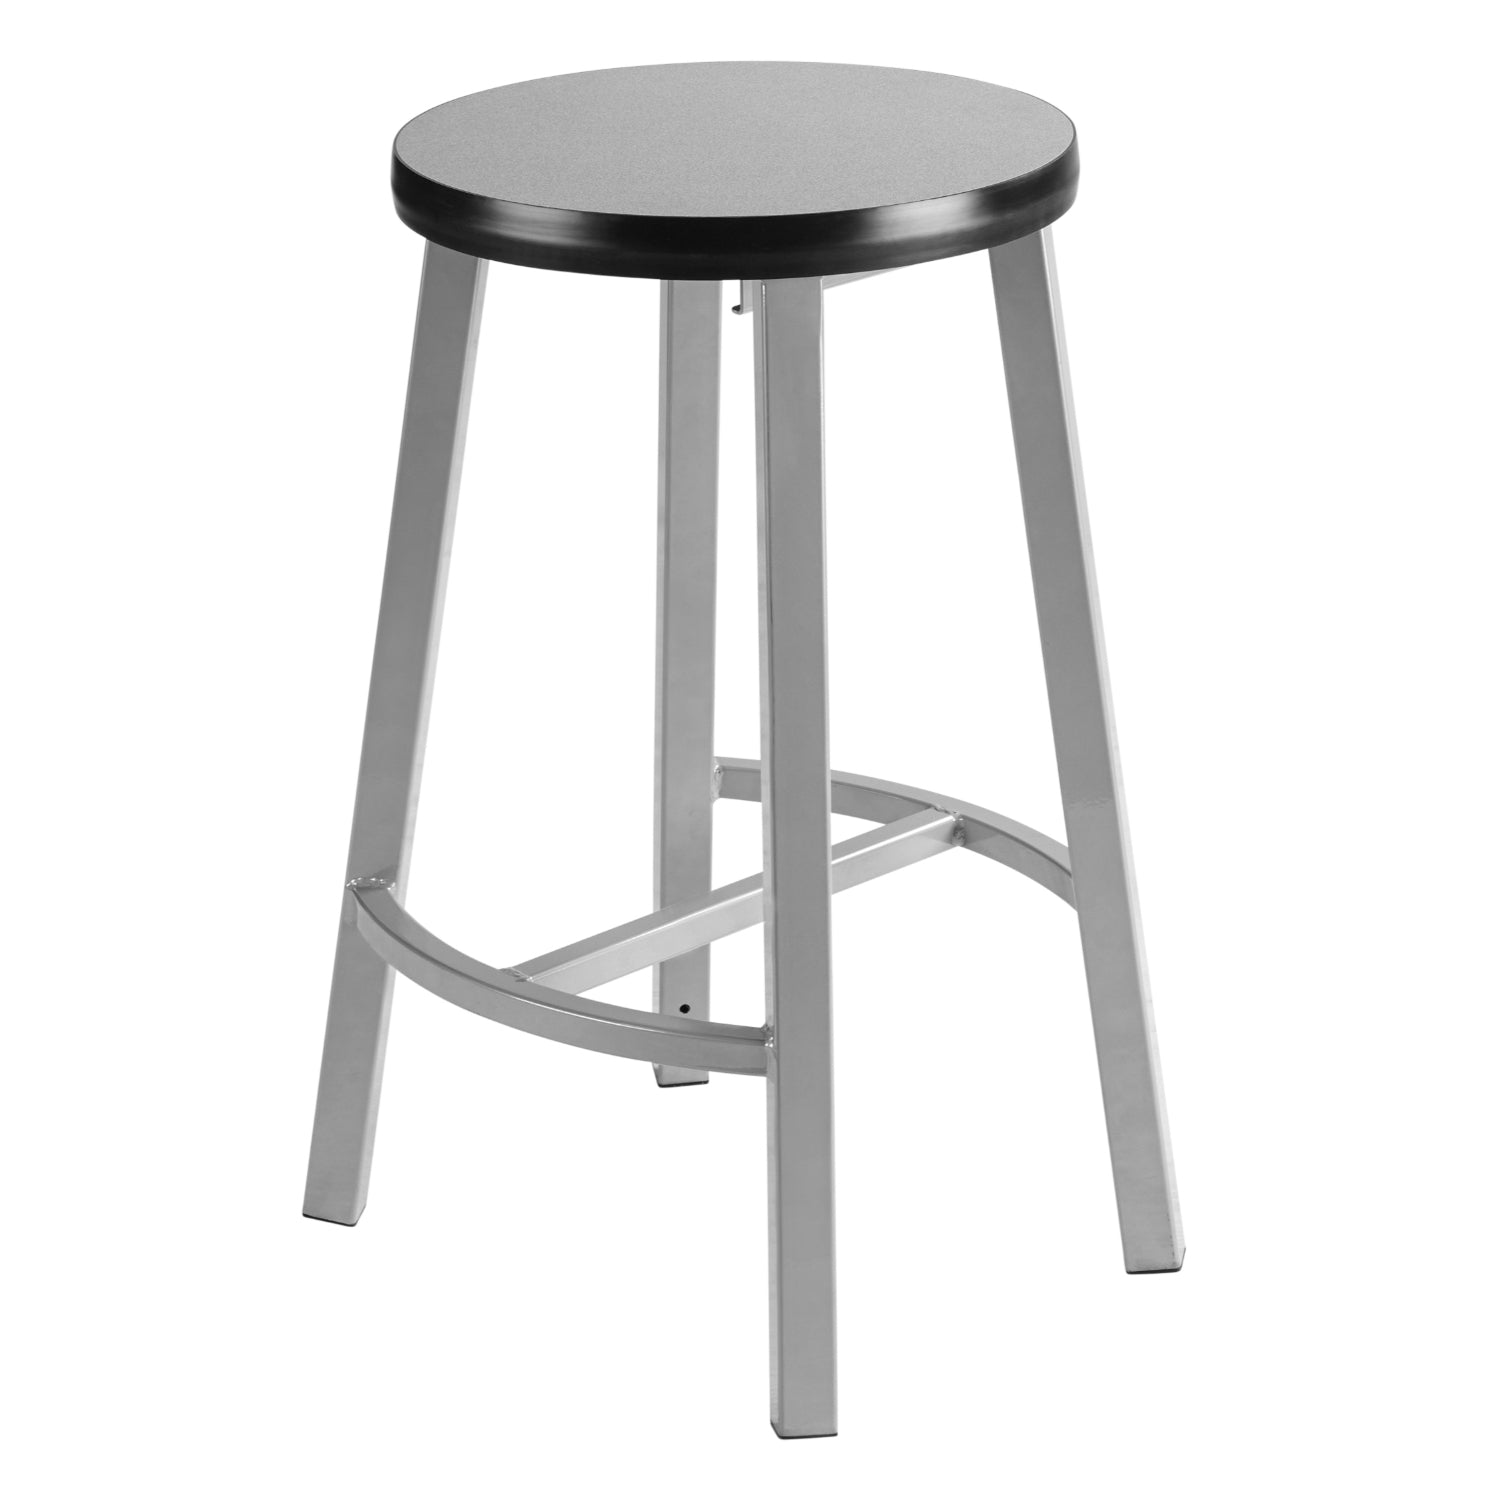 Titan Stool, Laminate Seat with Particleboard Core/T-Mold Edge, 24" H